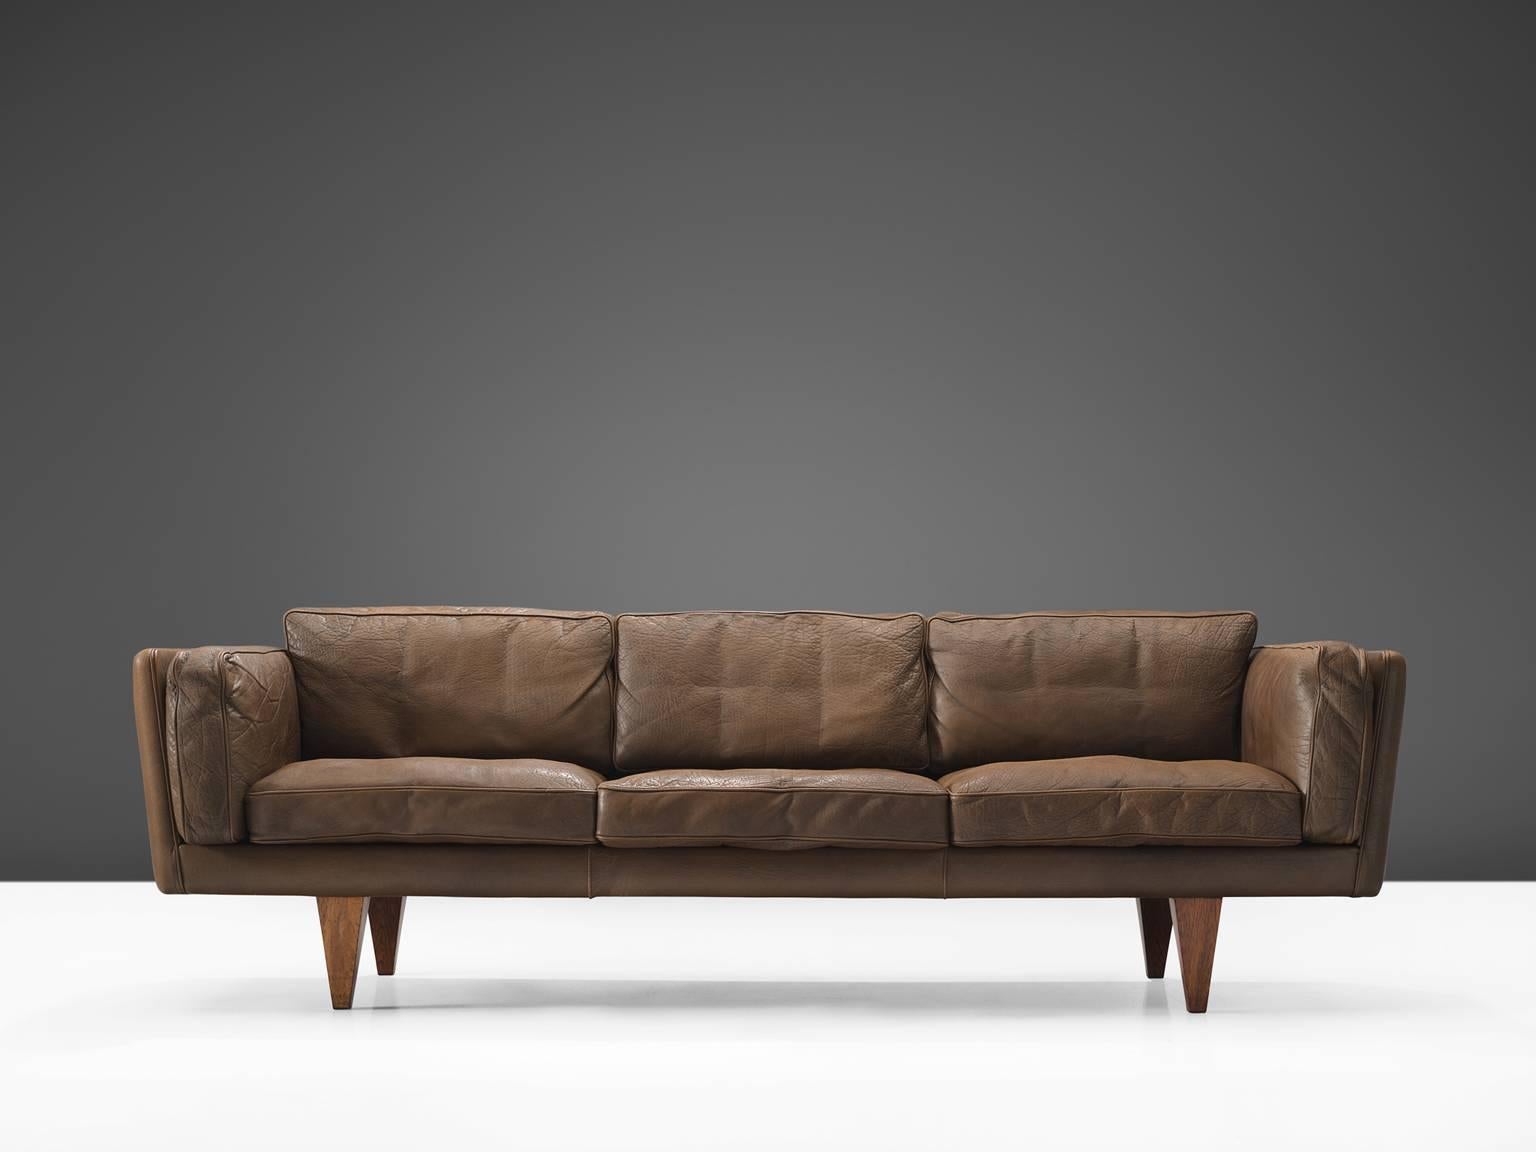 Illum Wikkelsø, sofa model V11, brown leather and wood, Denmark, 1960s.

This three-seat sofa is designed by Danish designer Illum Wikkelsø. Highly comfortable and beautiful designed sofa with dark brown leather upholstery. The dark brown high